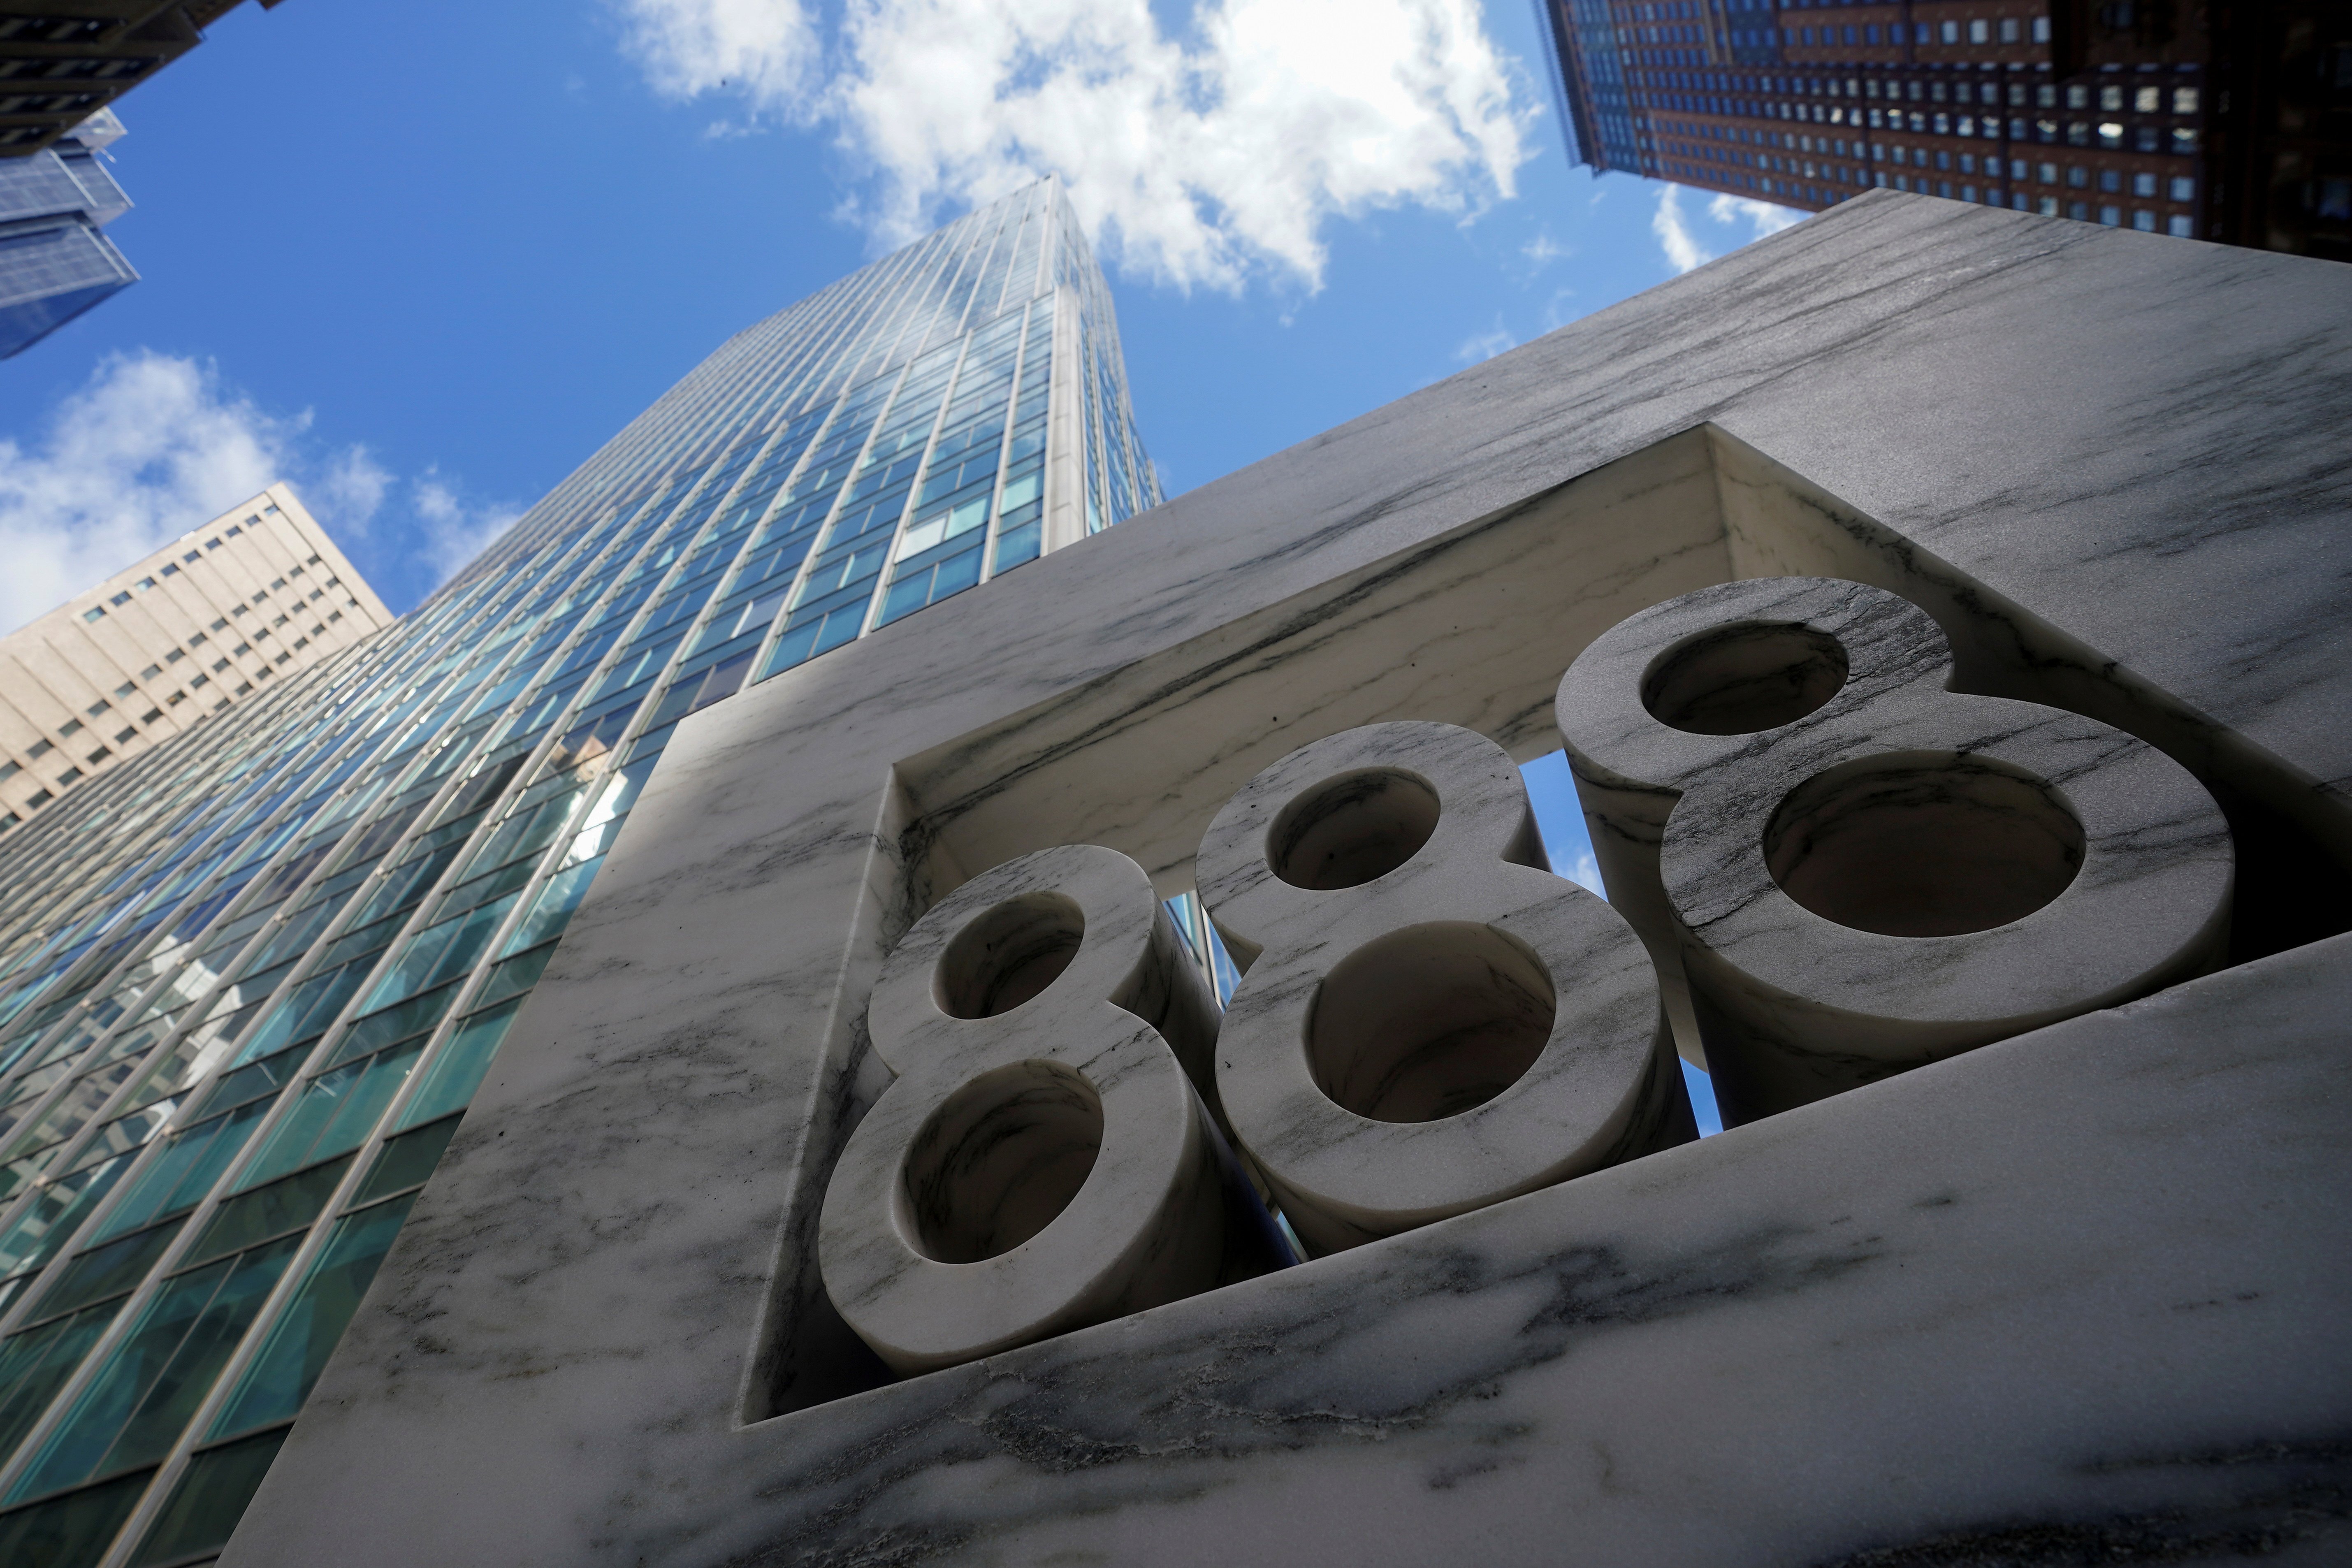 888 7th Ave, a building in NEw York that reportedly houses Bill Hwang’s Archegos Capital Management. Photo: Reuters